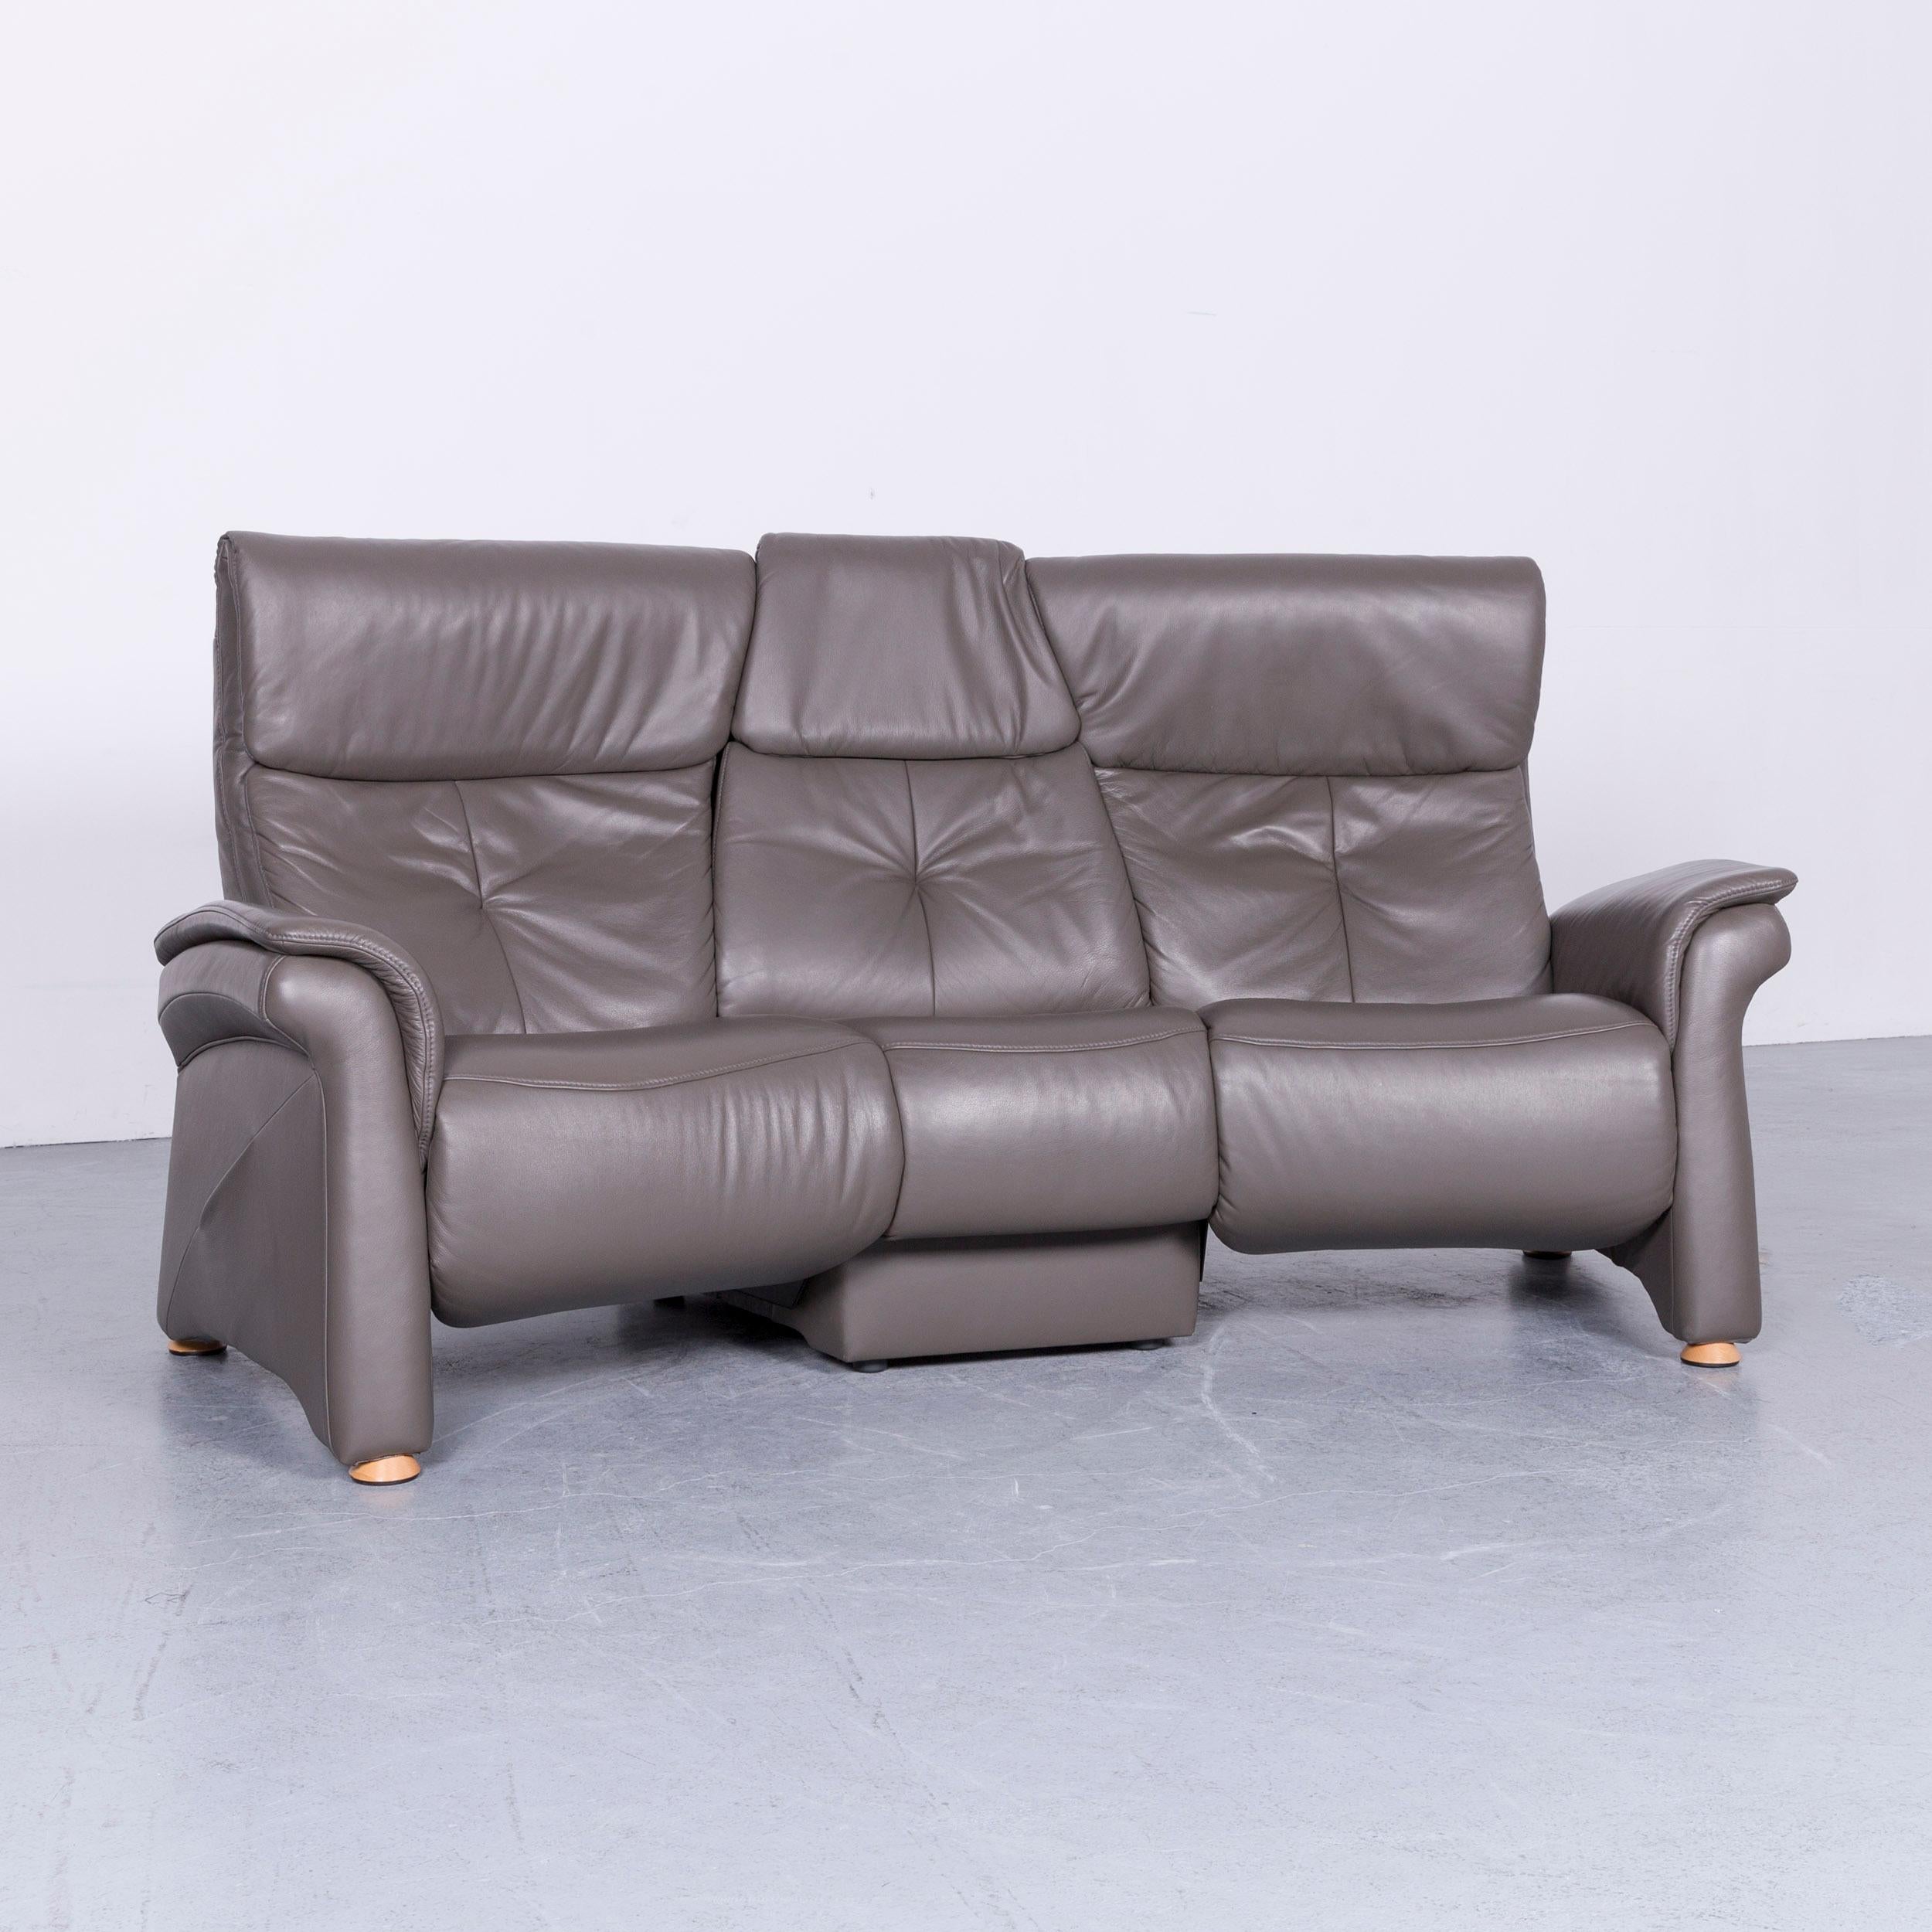 We bring to you an Himolla designer leather sofa grey three-seat couch recliner.




























 